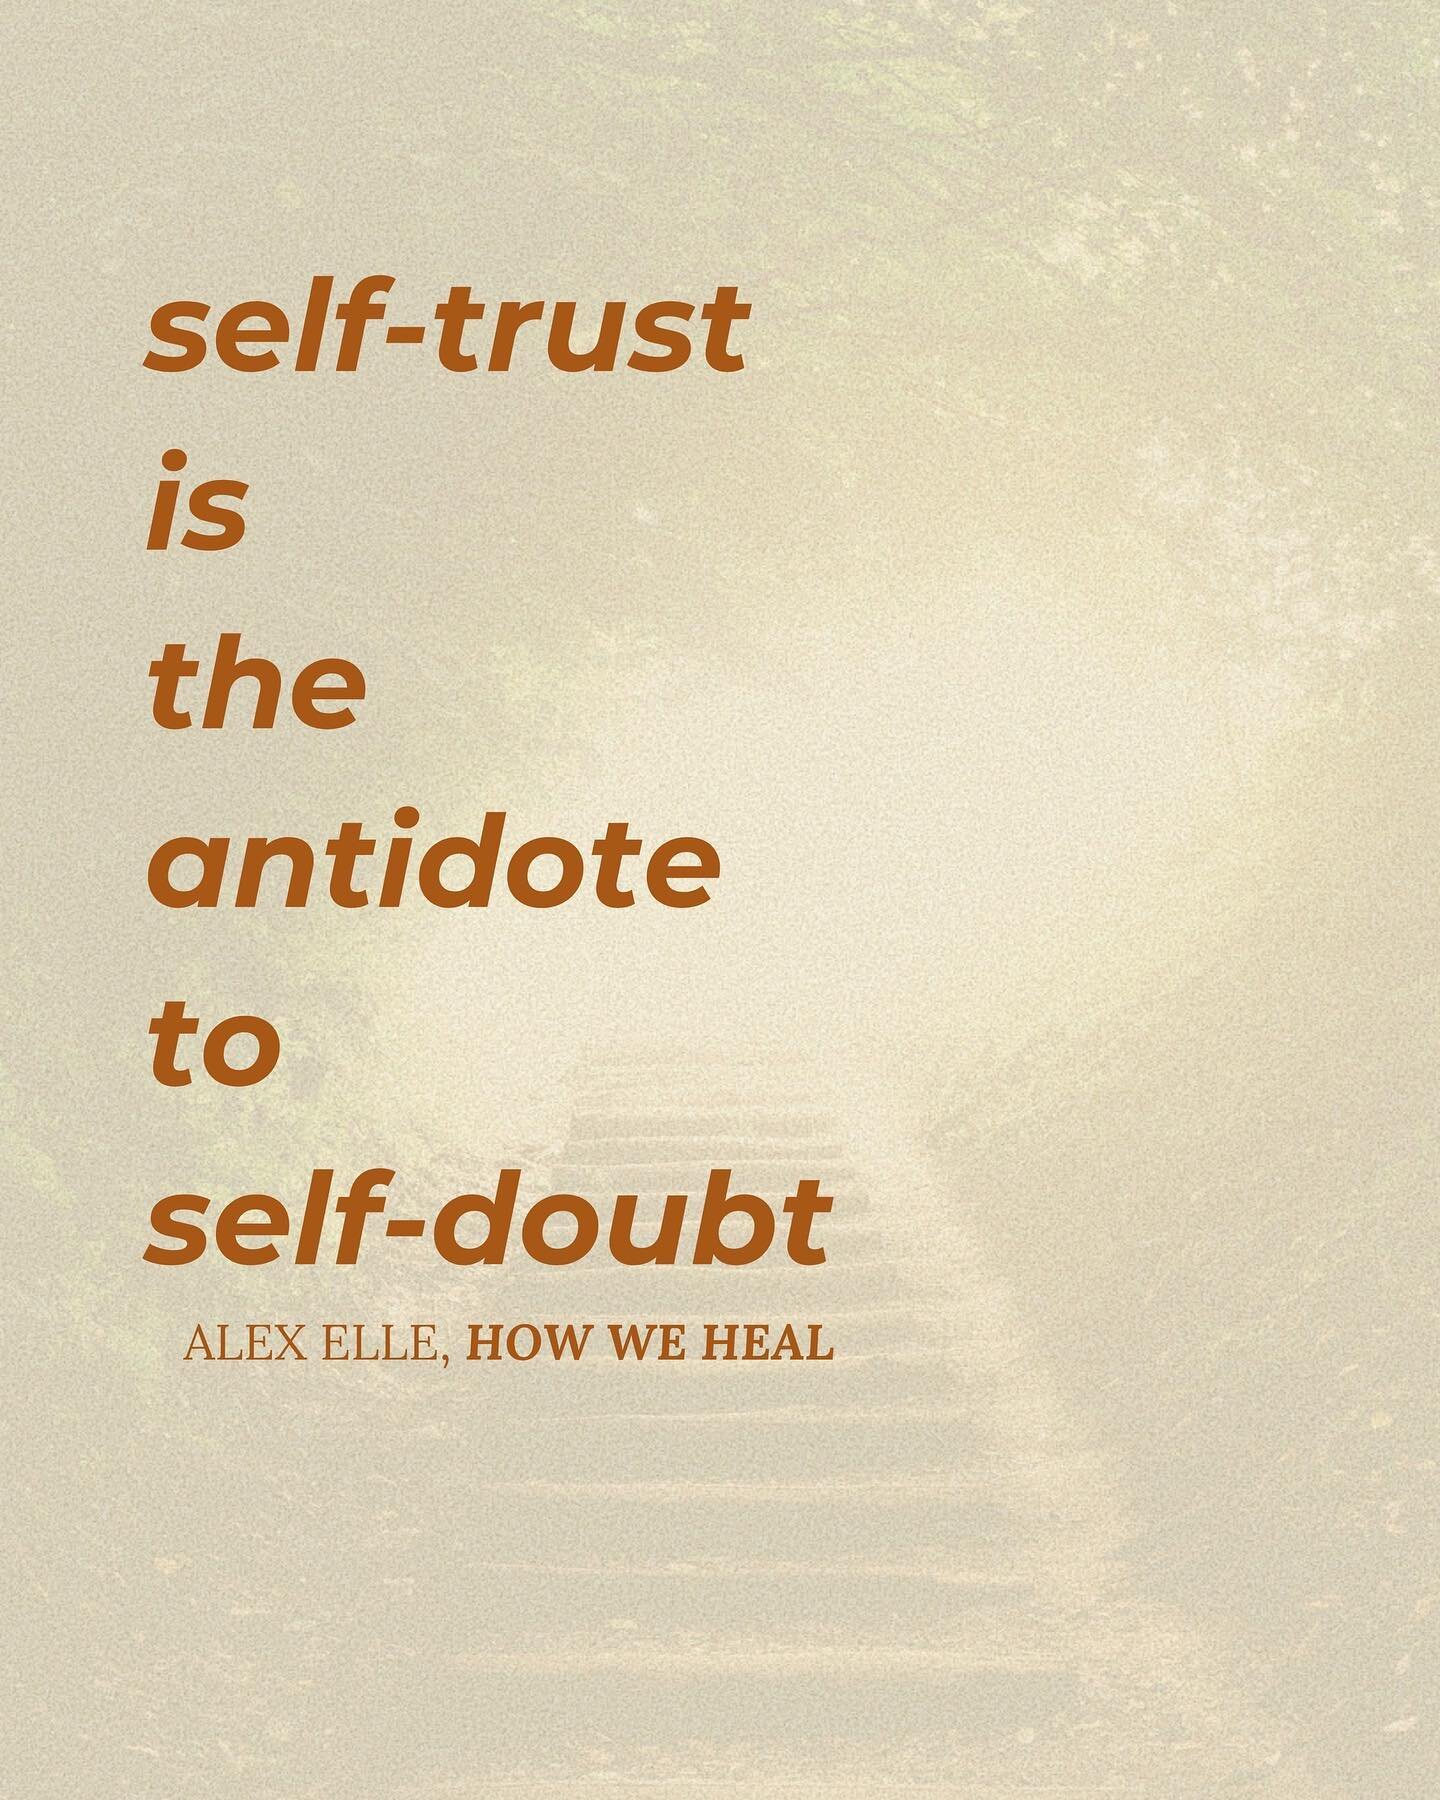 Self-doubt is fueled by the stories we tell ourselves (among many other things!). It&rsquo;s easy to remember moments that validate your doubtfulness, it&rsquo;s also easy to exaggerate these moments and make them a major part of who you are, how you